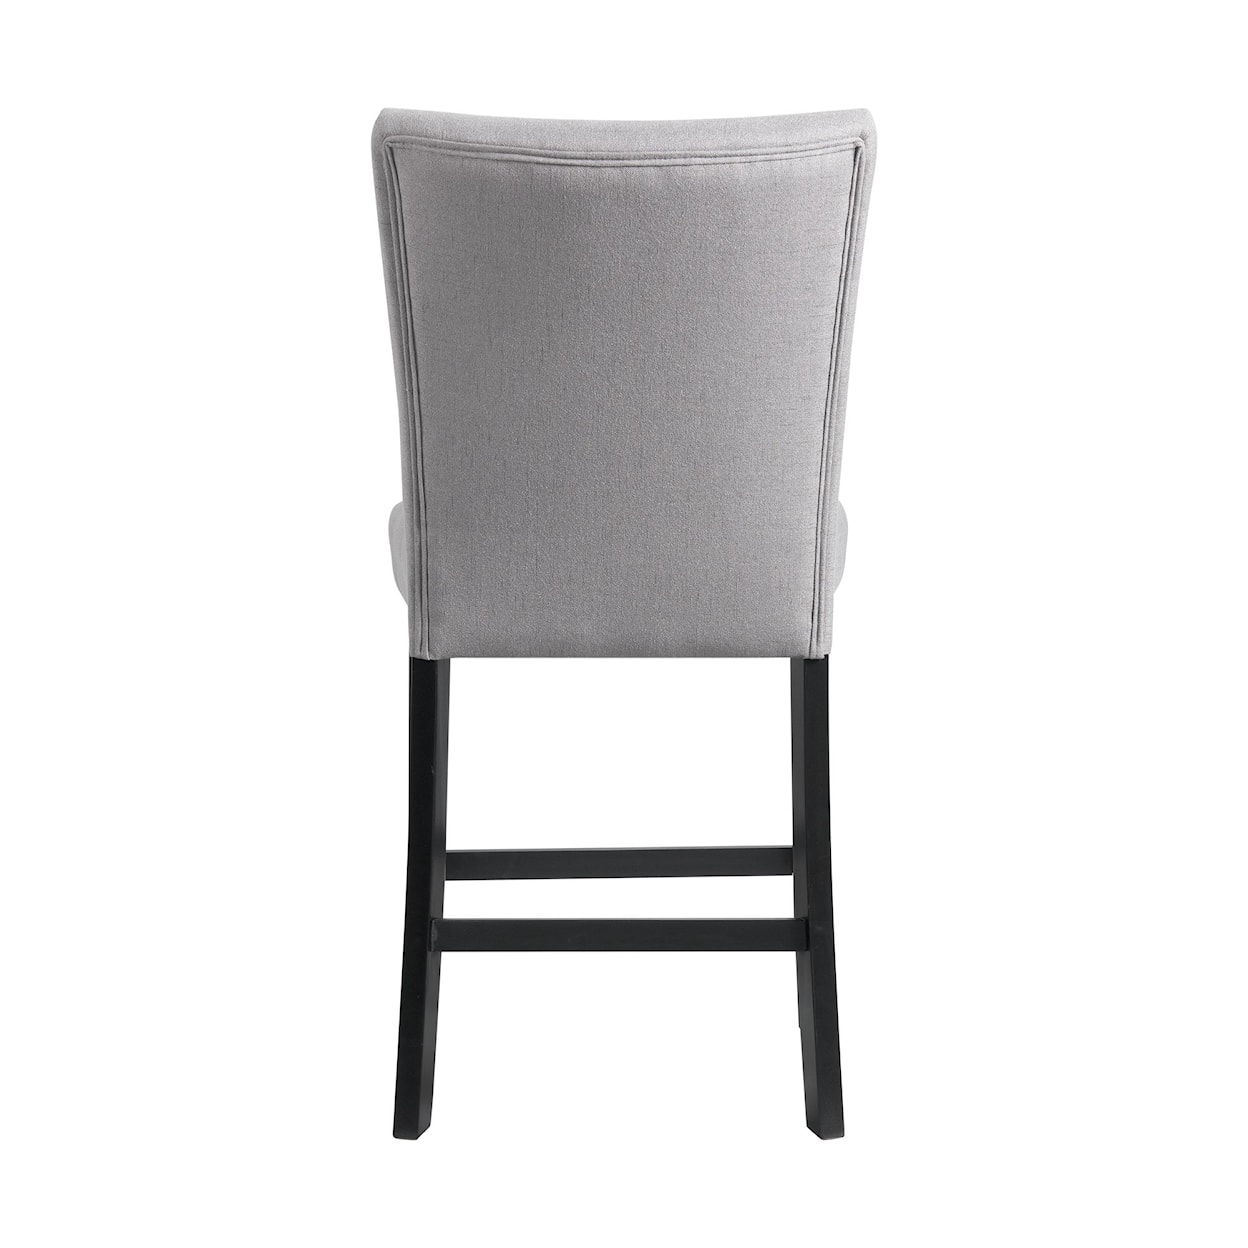 Elements International Beckley Counter-Height Side Chair